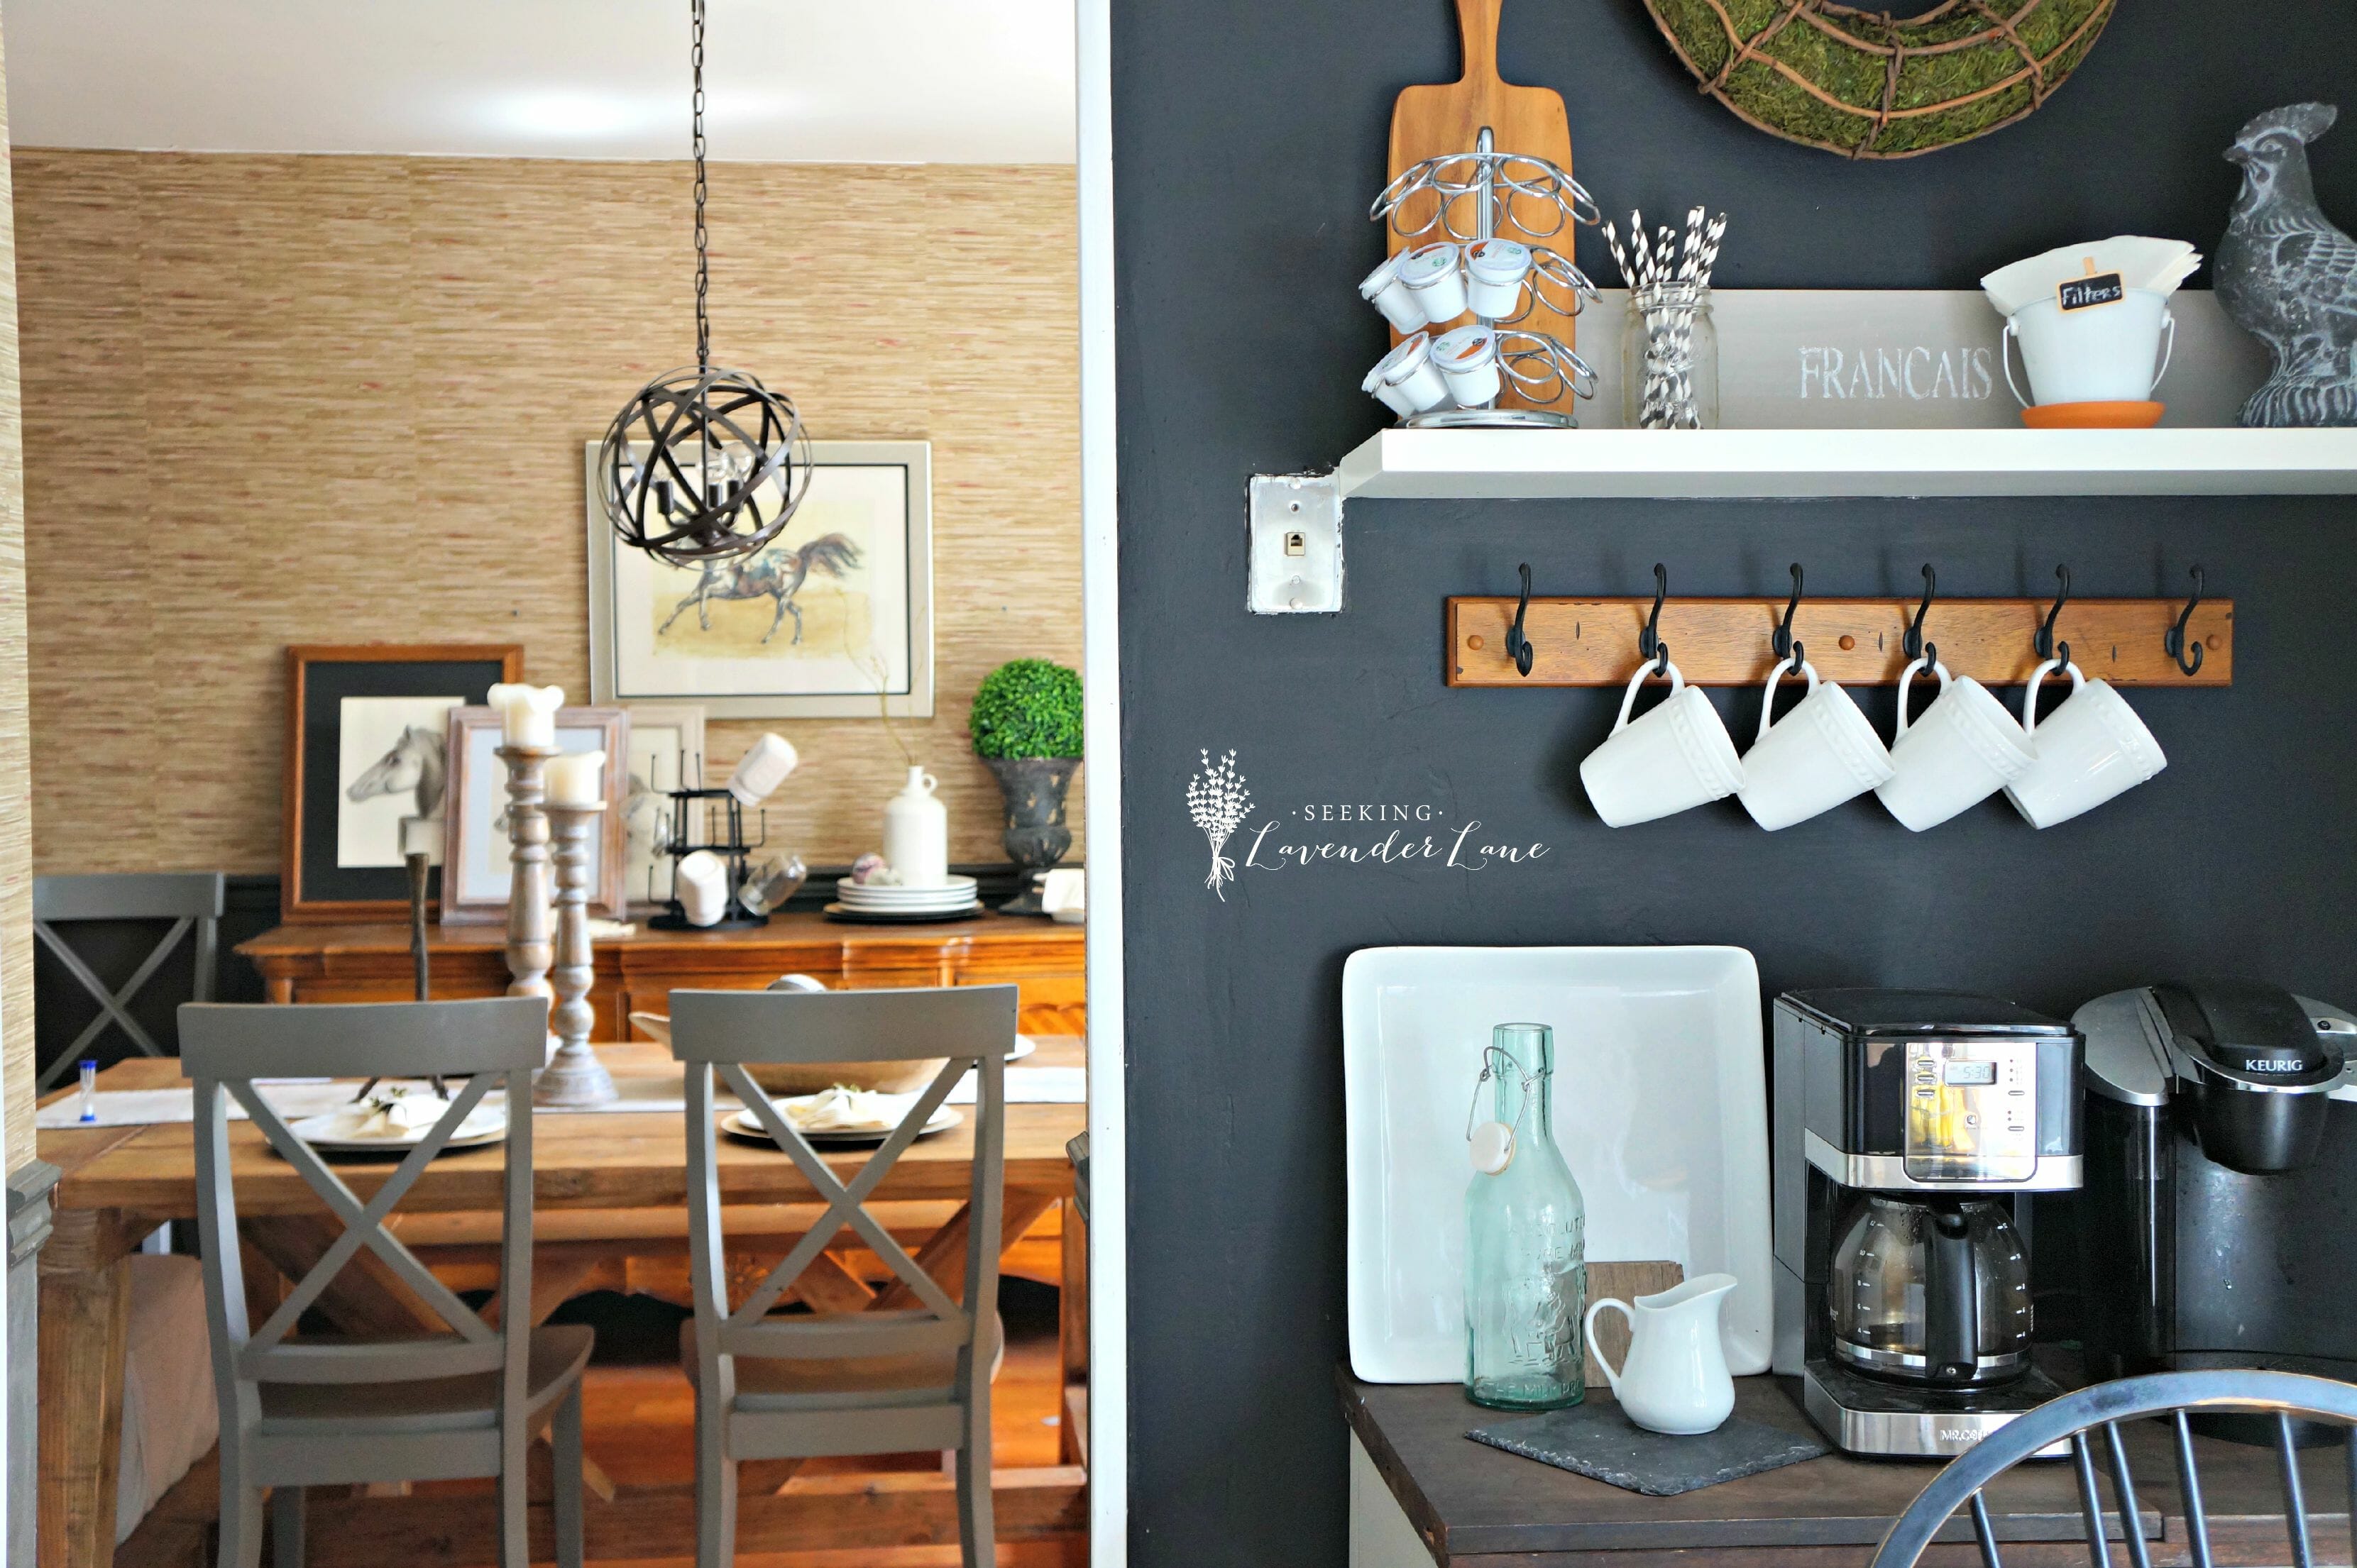 Chalkboard Wall Ideas Creditrestore inside Chalkboard For Kitchen Wall for your Reference